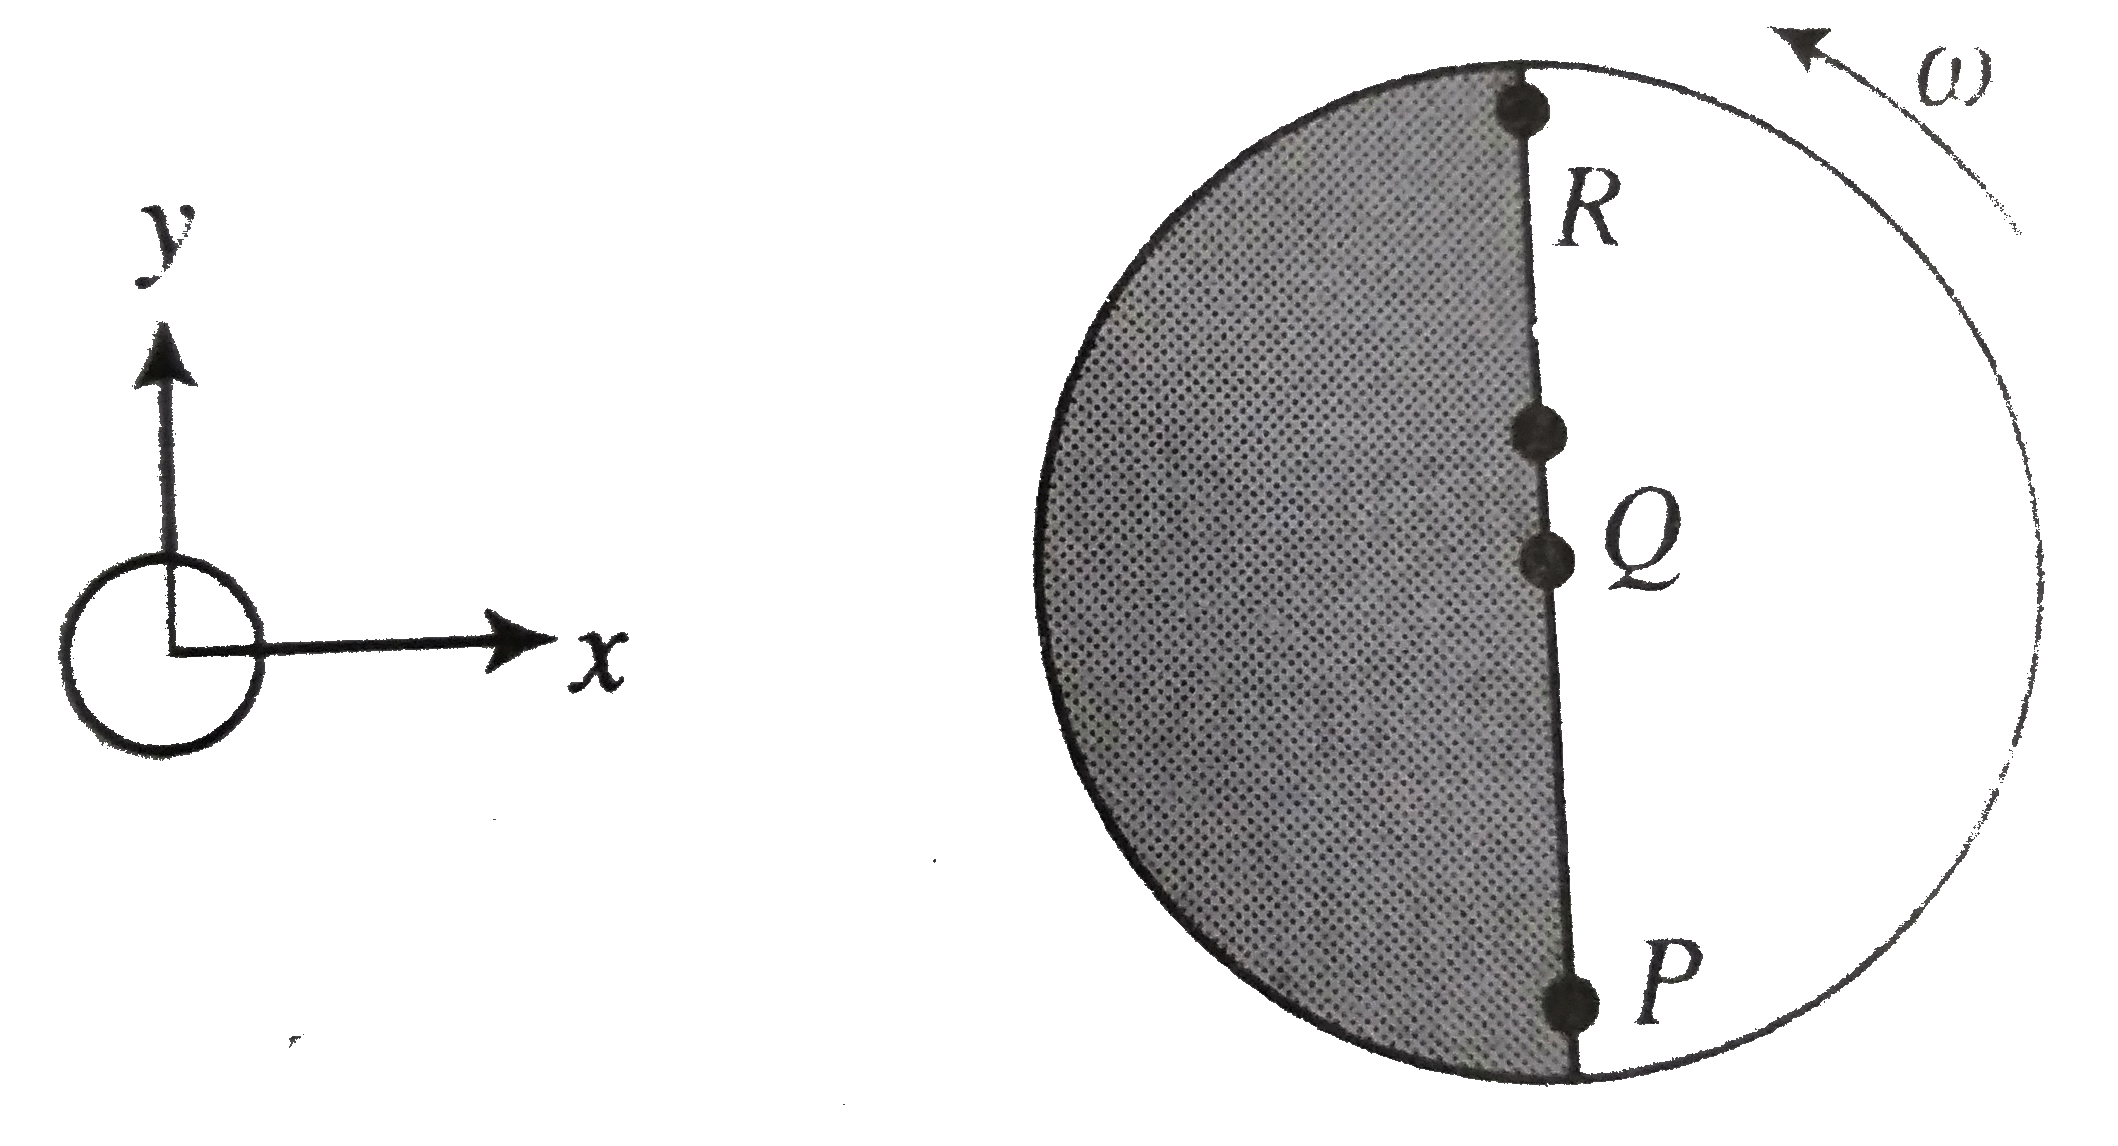 Consider a disc rotating in the horizontal plane with a constant angular speed omega about its center O. The disc has a shaded region on one side of the diameter and an unshaded region on the other side as shown in figure. When the disc is in the orientation as shown, two pebbles P and Q are simultaneously projected at an angle towards R. The velocity of projection in the y-z plane and is same for both pebbles with respect to the disc. Assume that (i) they land back on the disc before the disc has completed 1//8 rotation, (ii) their range is less than half the disc radius, and (iii) omega remains constant throughout. Then